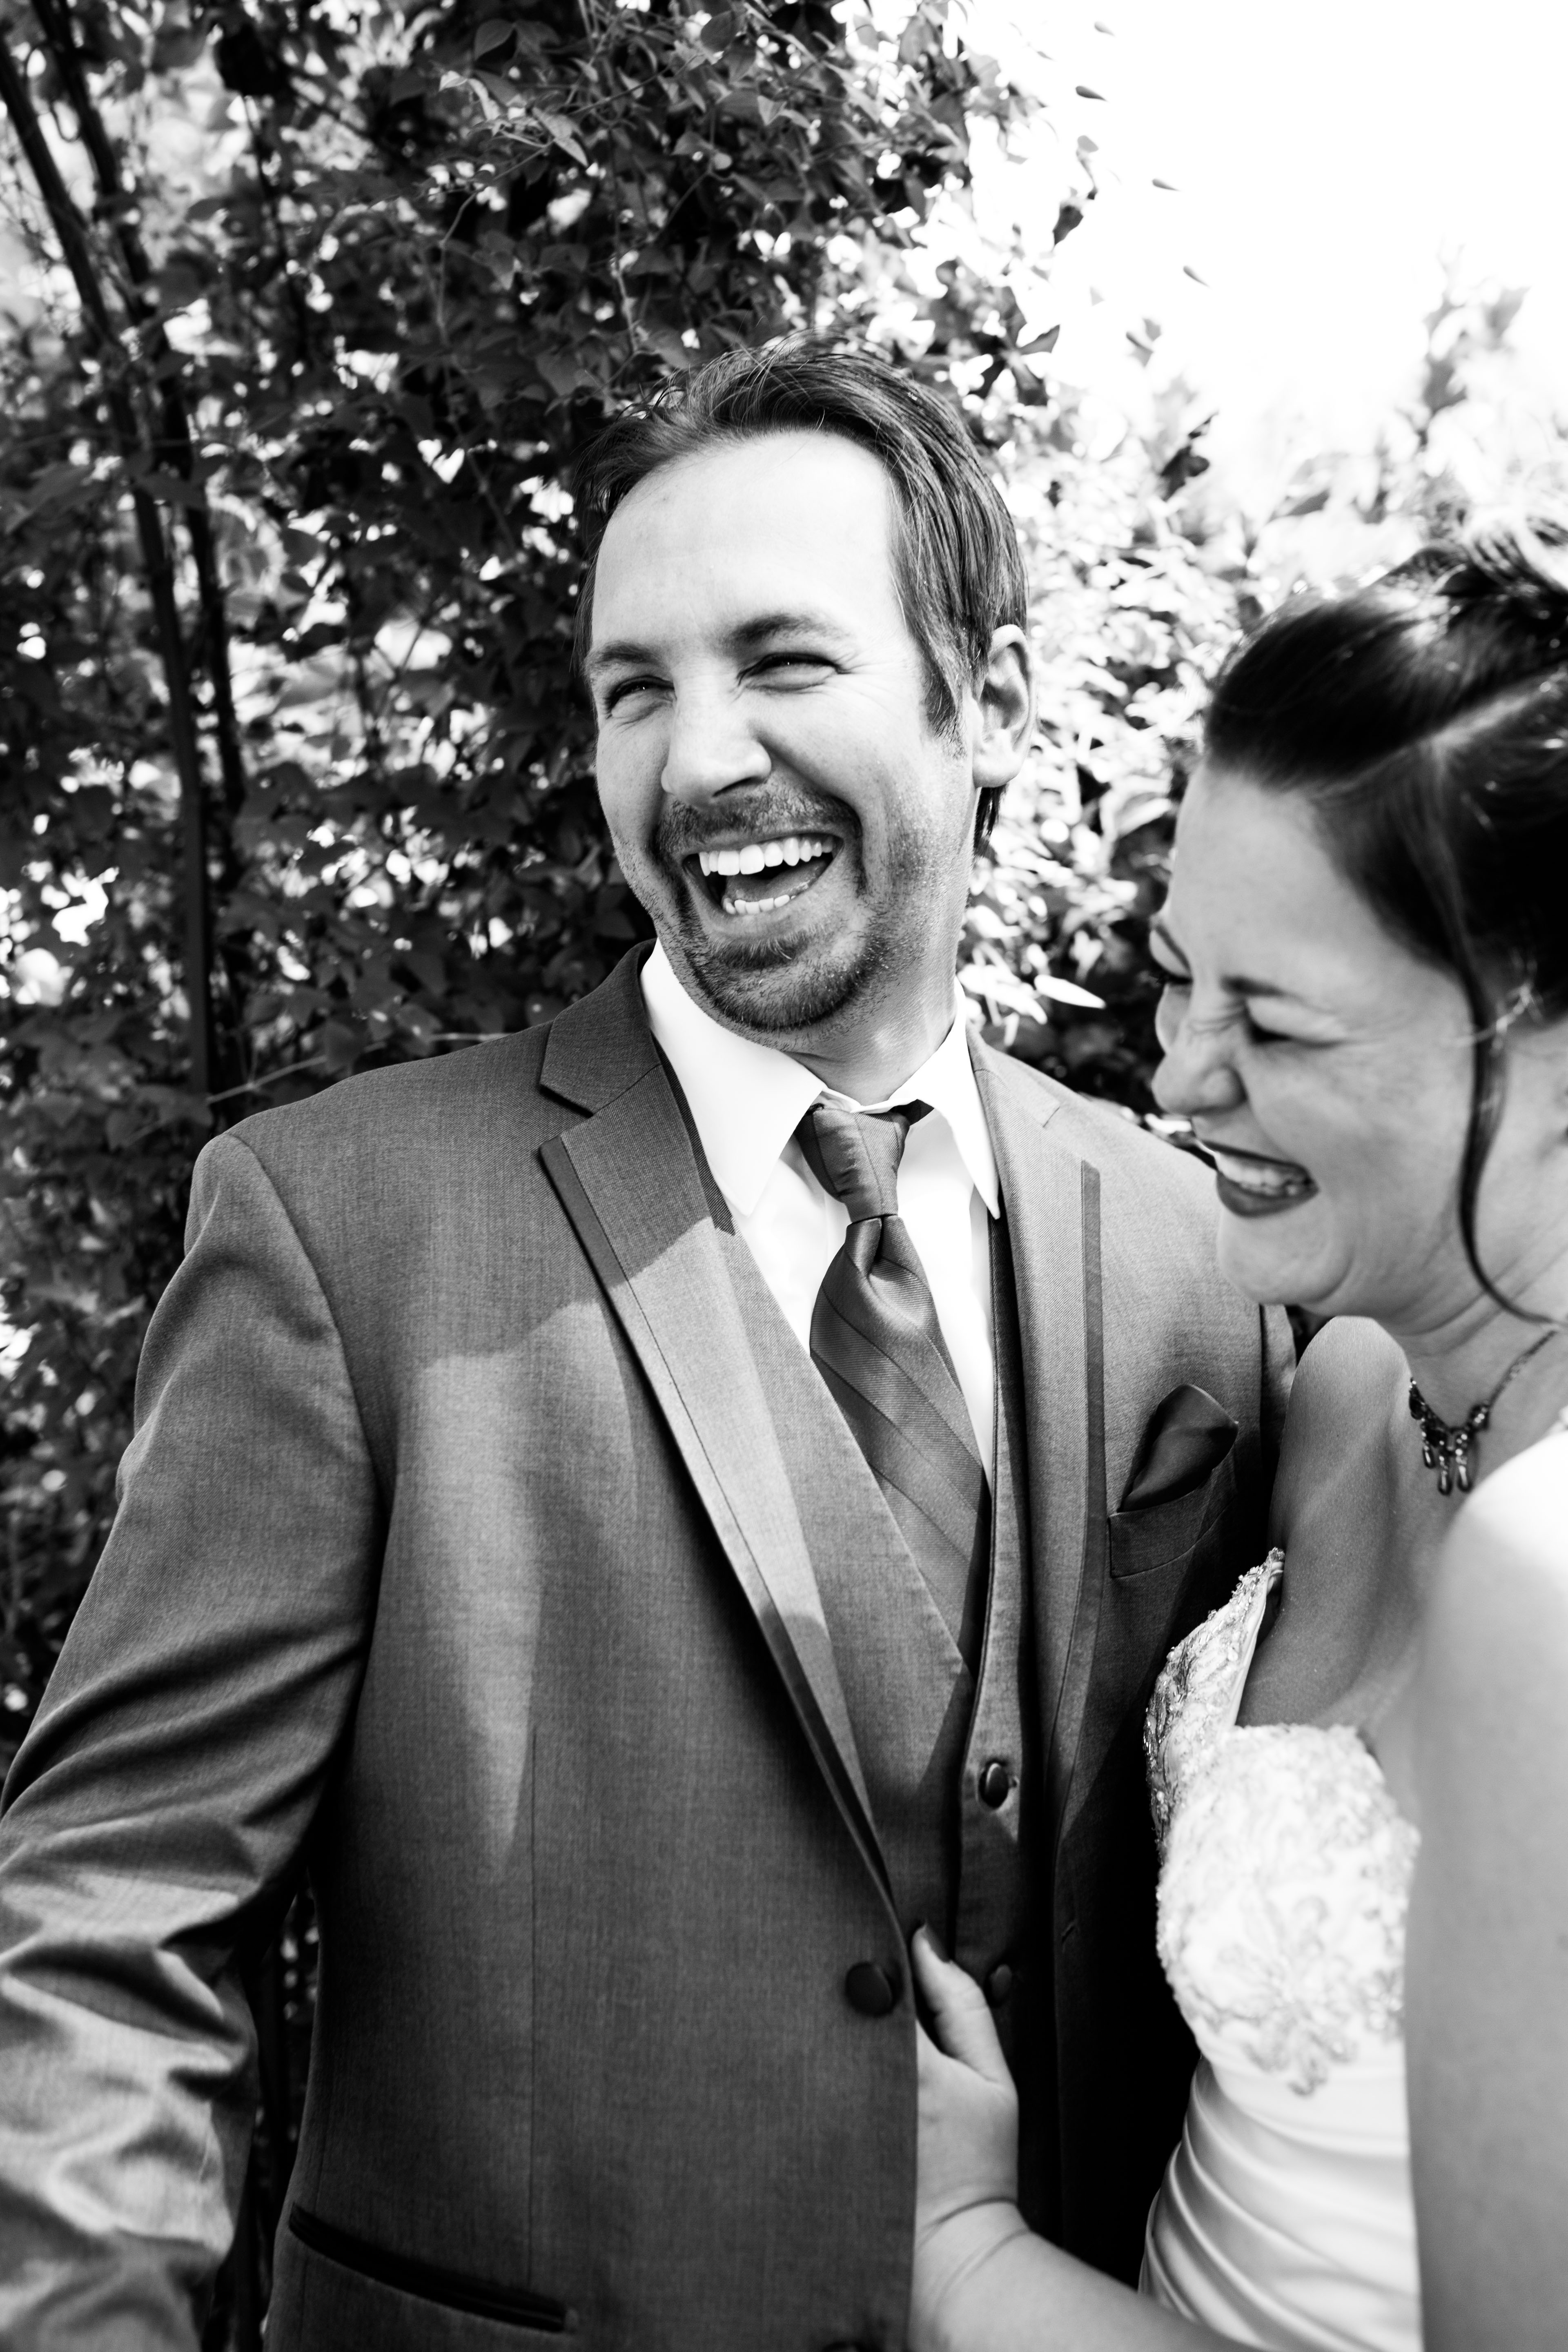 Quad Cities Wedding - Laughing Bride and groom